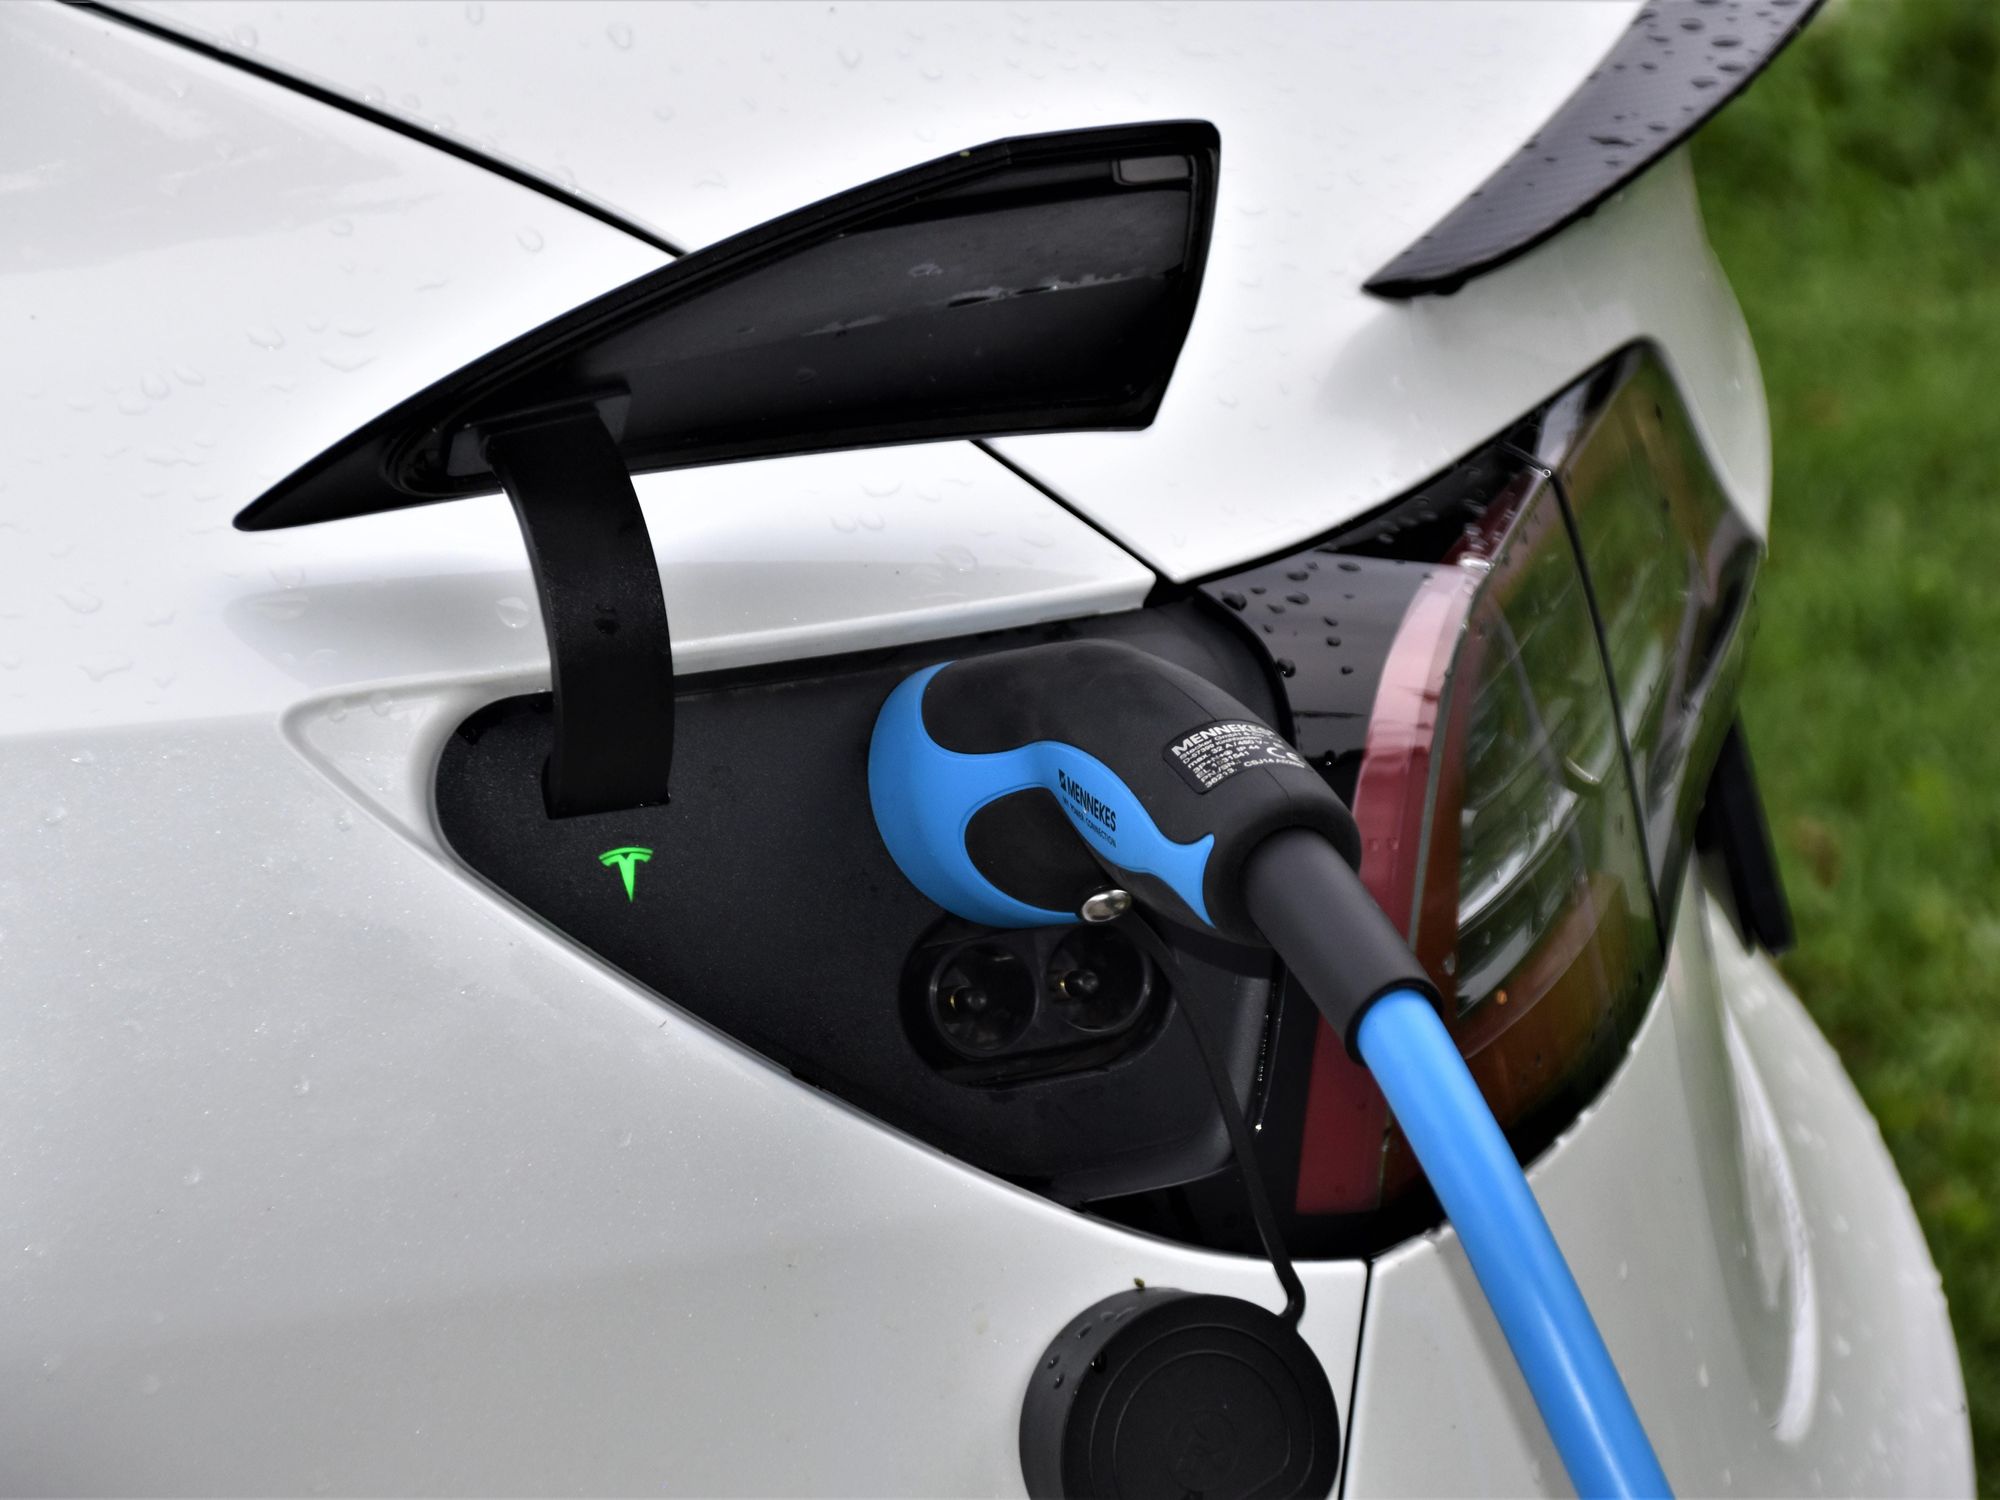 LA Has Become a Magnet for EV Charging Startups. Biden's Plan Could Supercharge Them.